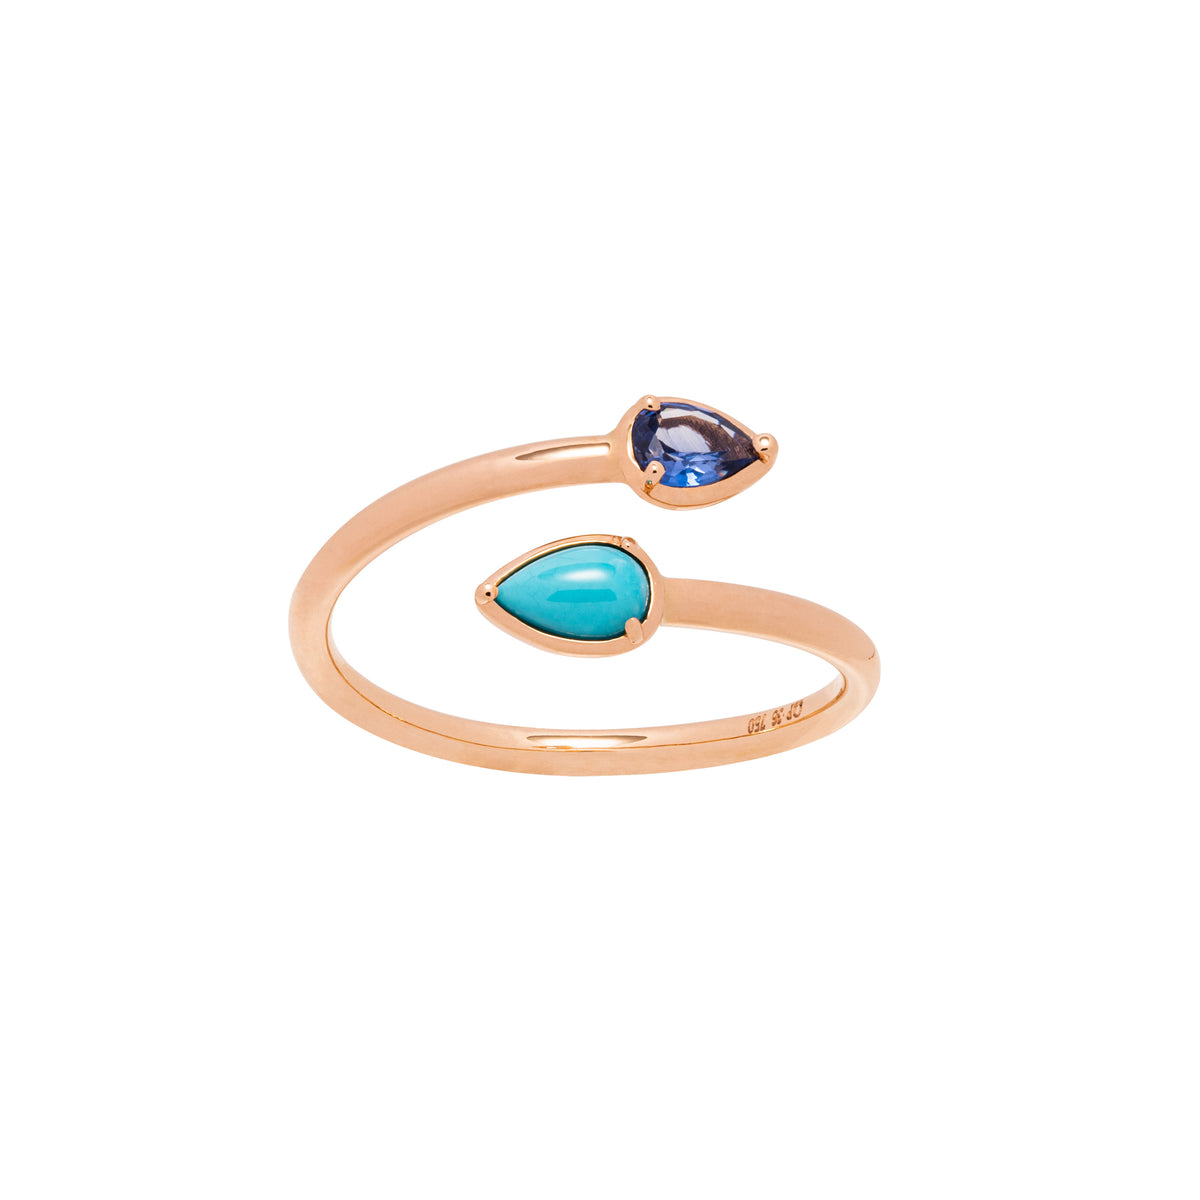 Sapphire and Turquoise Ring. Blue stone ring.